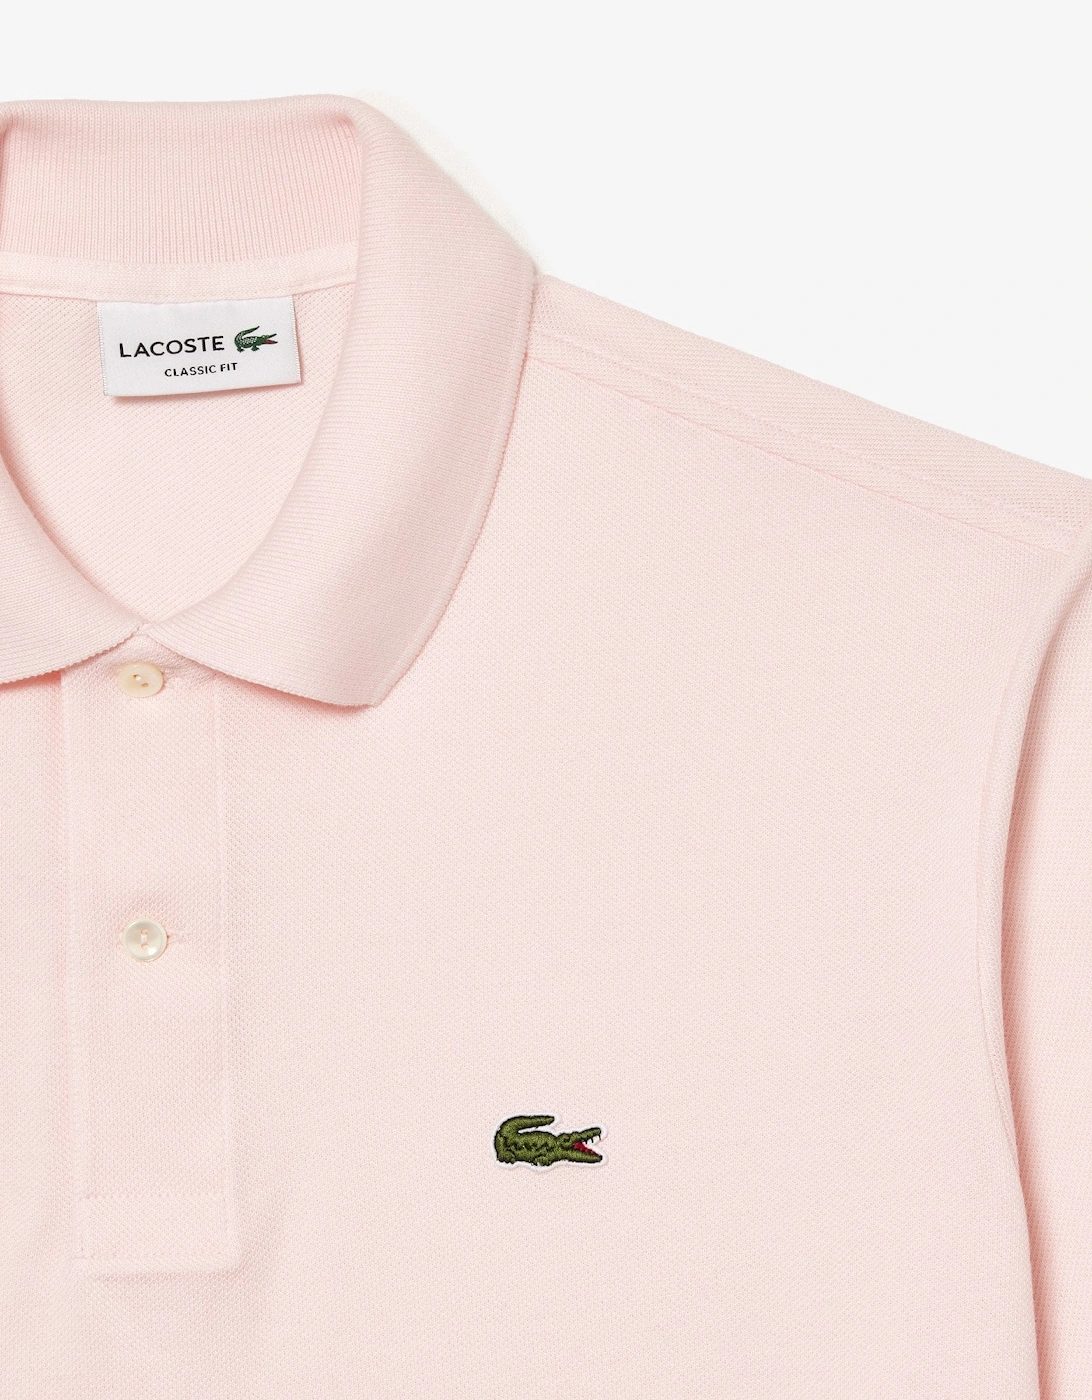 Men's Pink Classic Short Sleeved Polo Shirt